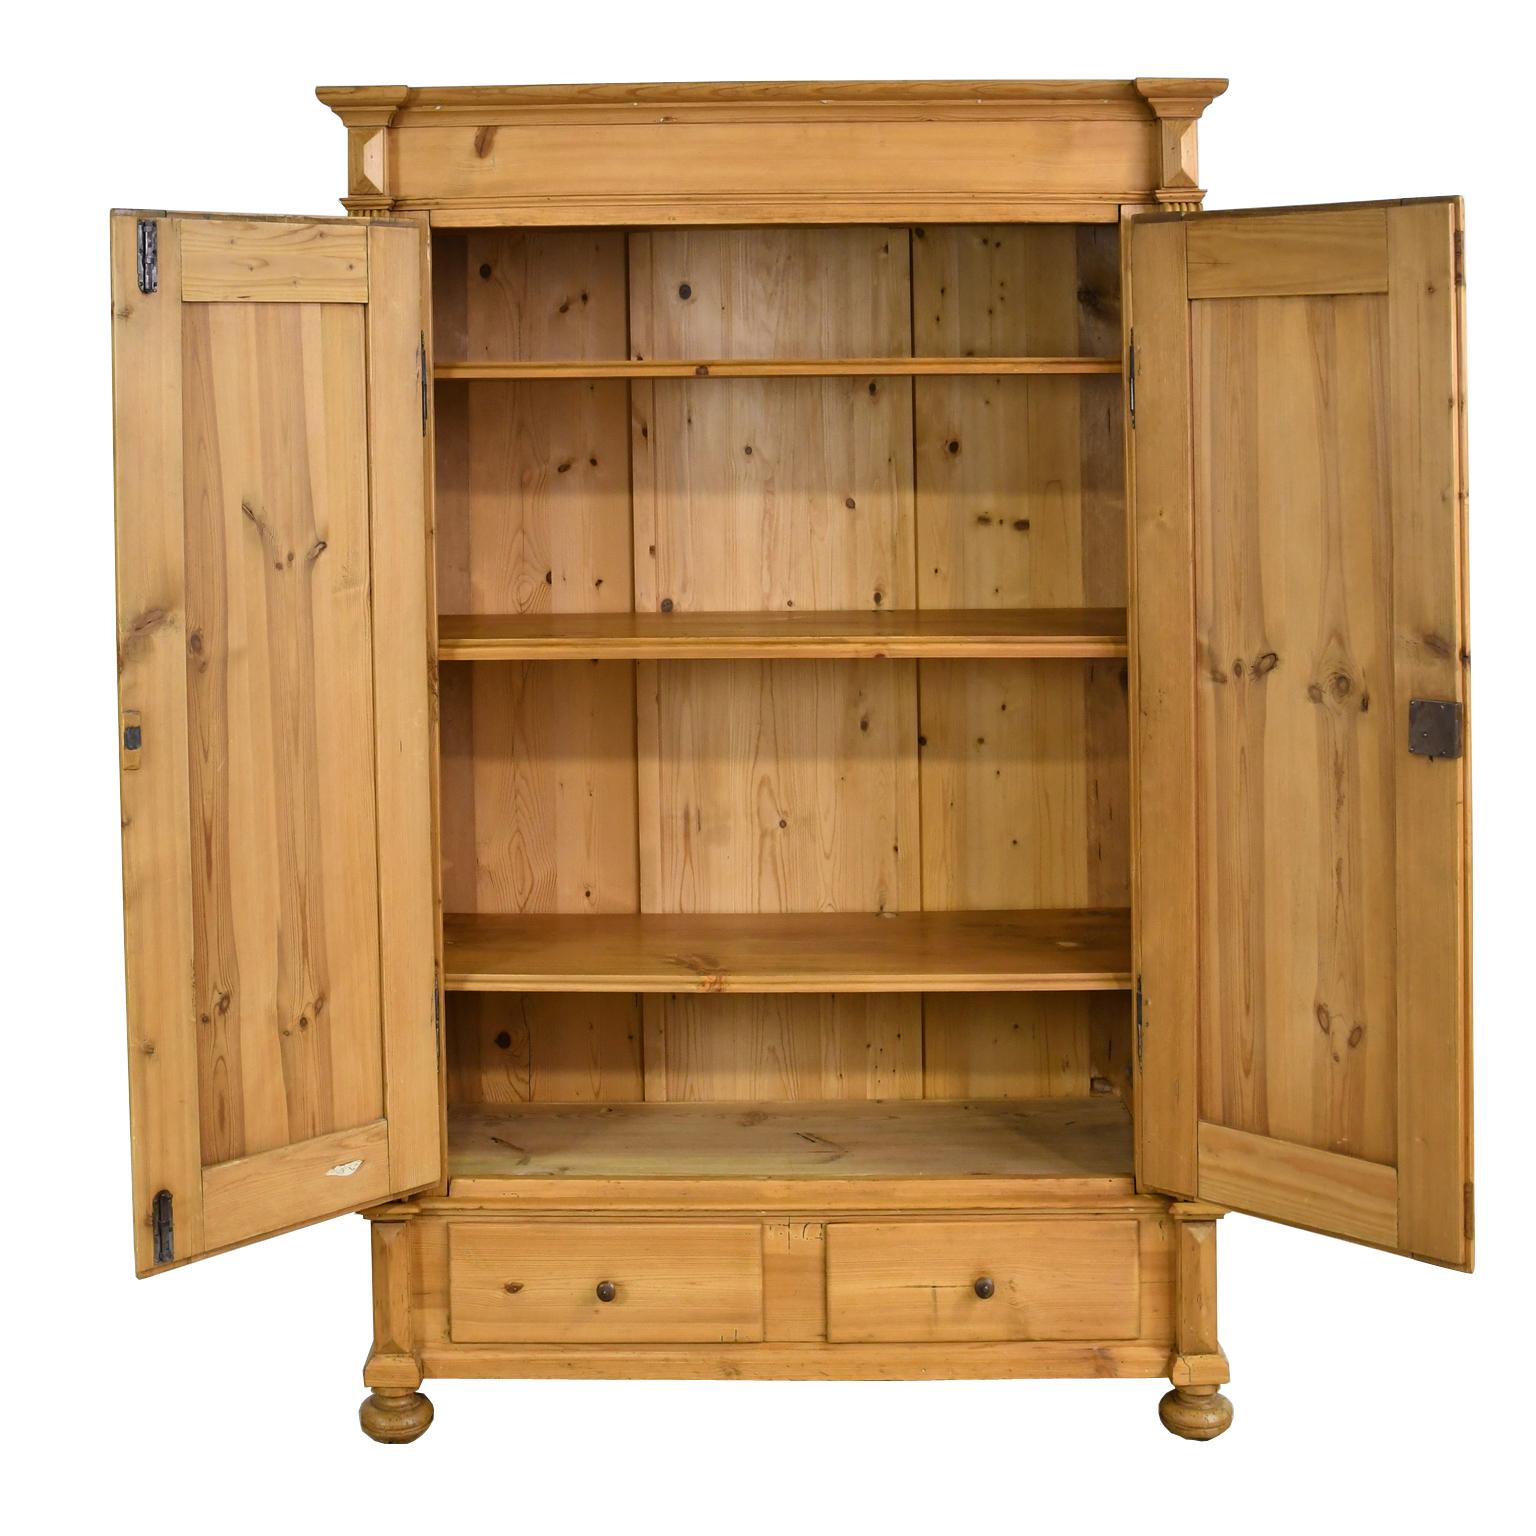 A German Gründerzeit armoire in scrubbed pine with two doors that have raised panels and open to three adjustable interior shelves, with two exterior storage drawers along the bottom. Offers all the original components including period hardware with